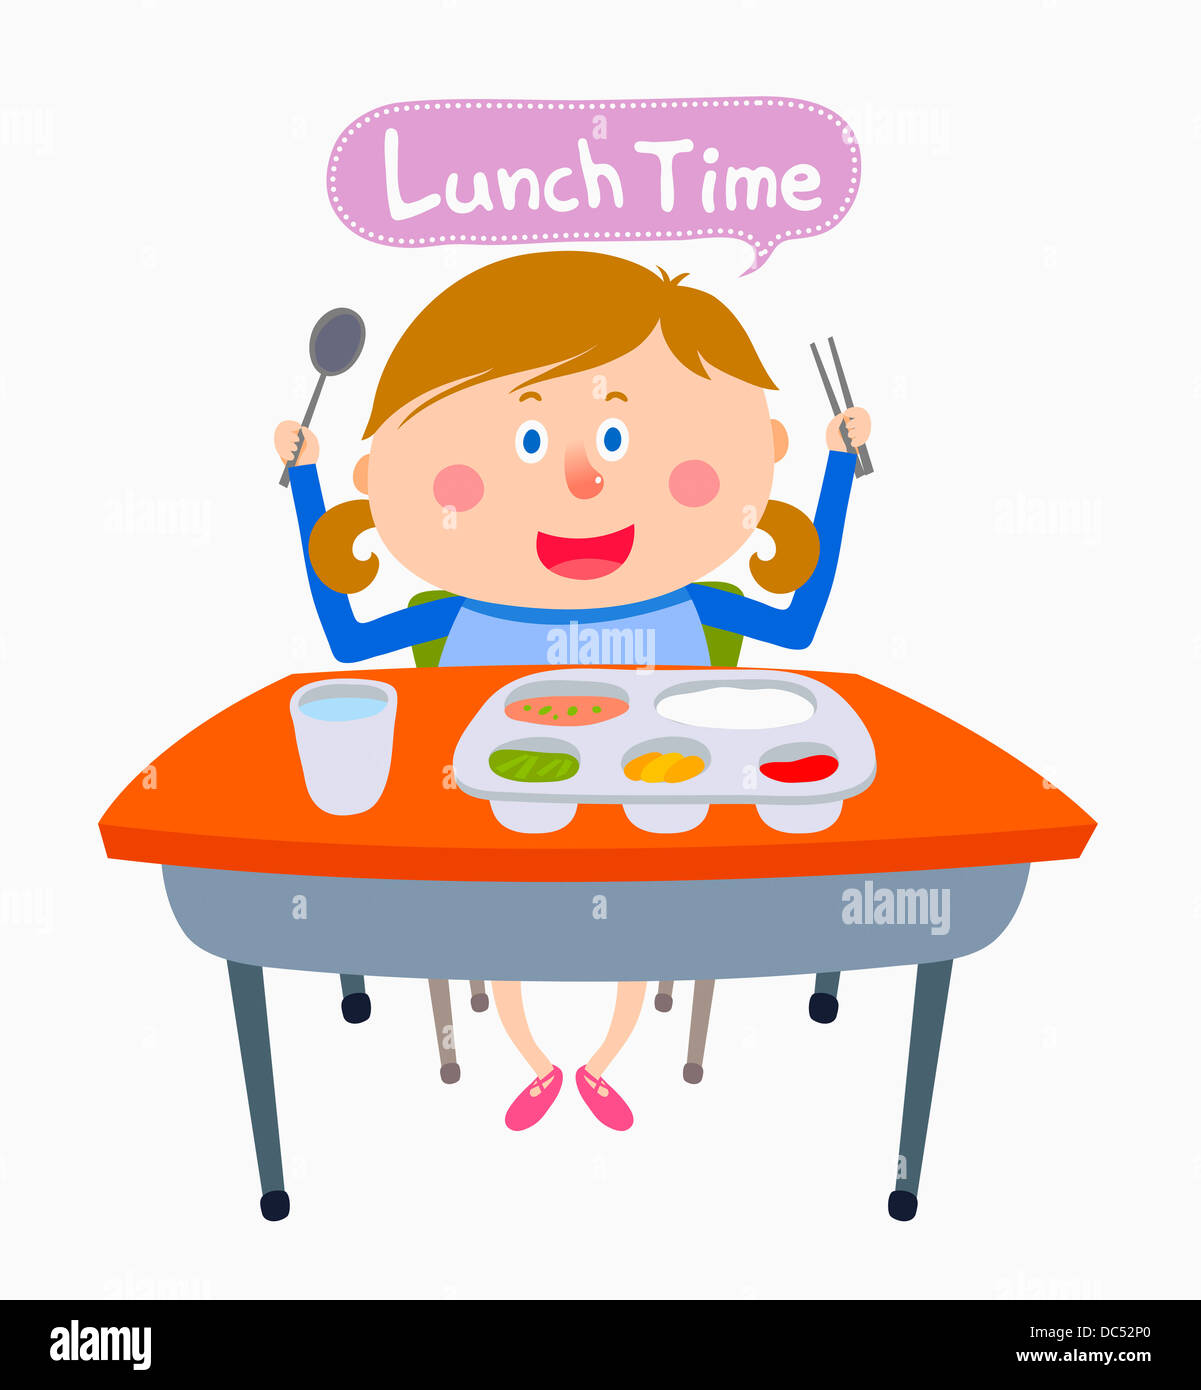 illustration of a student in lunch time Stock Photo - Alamy